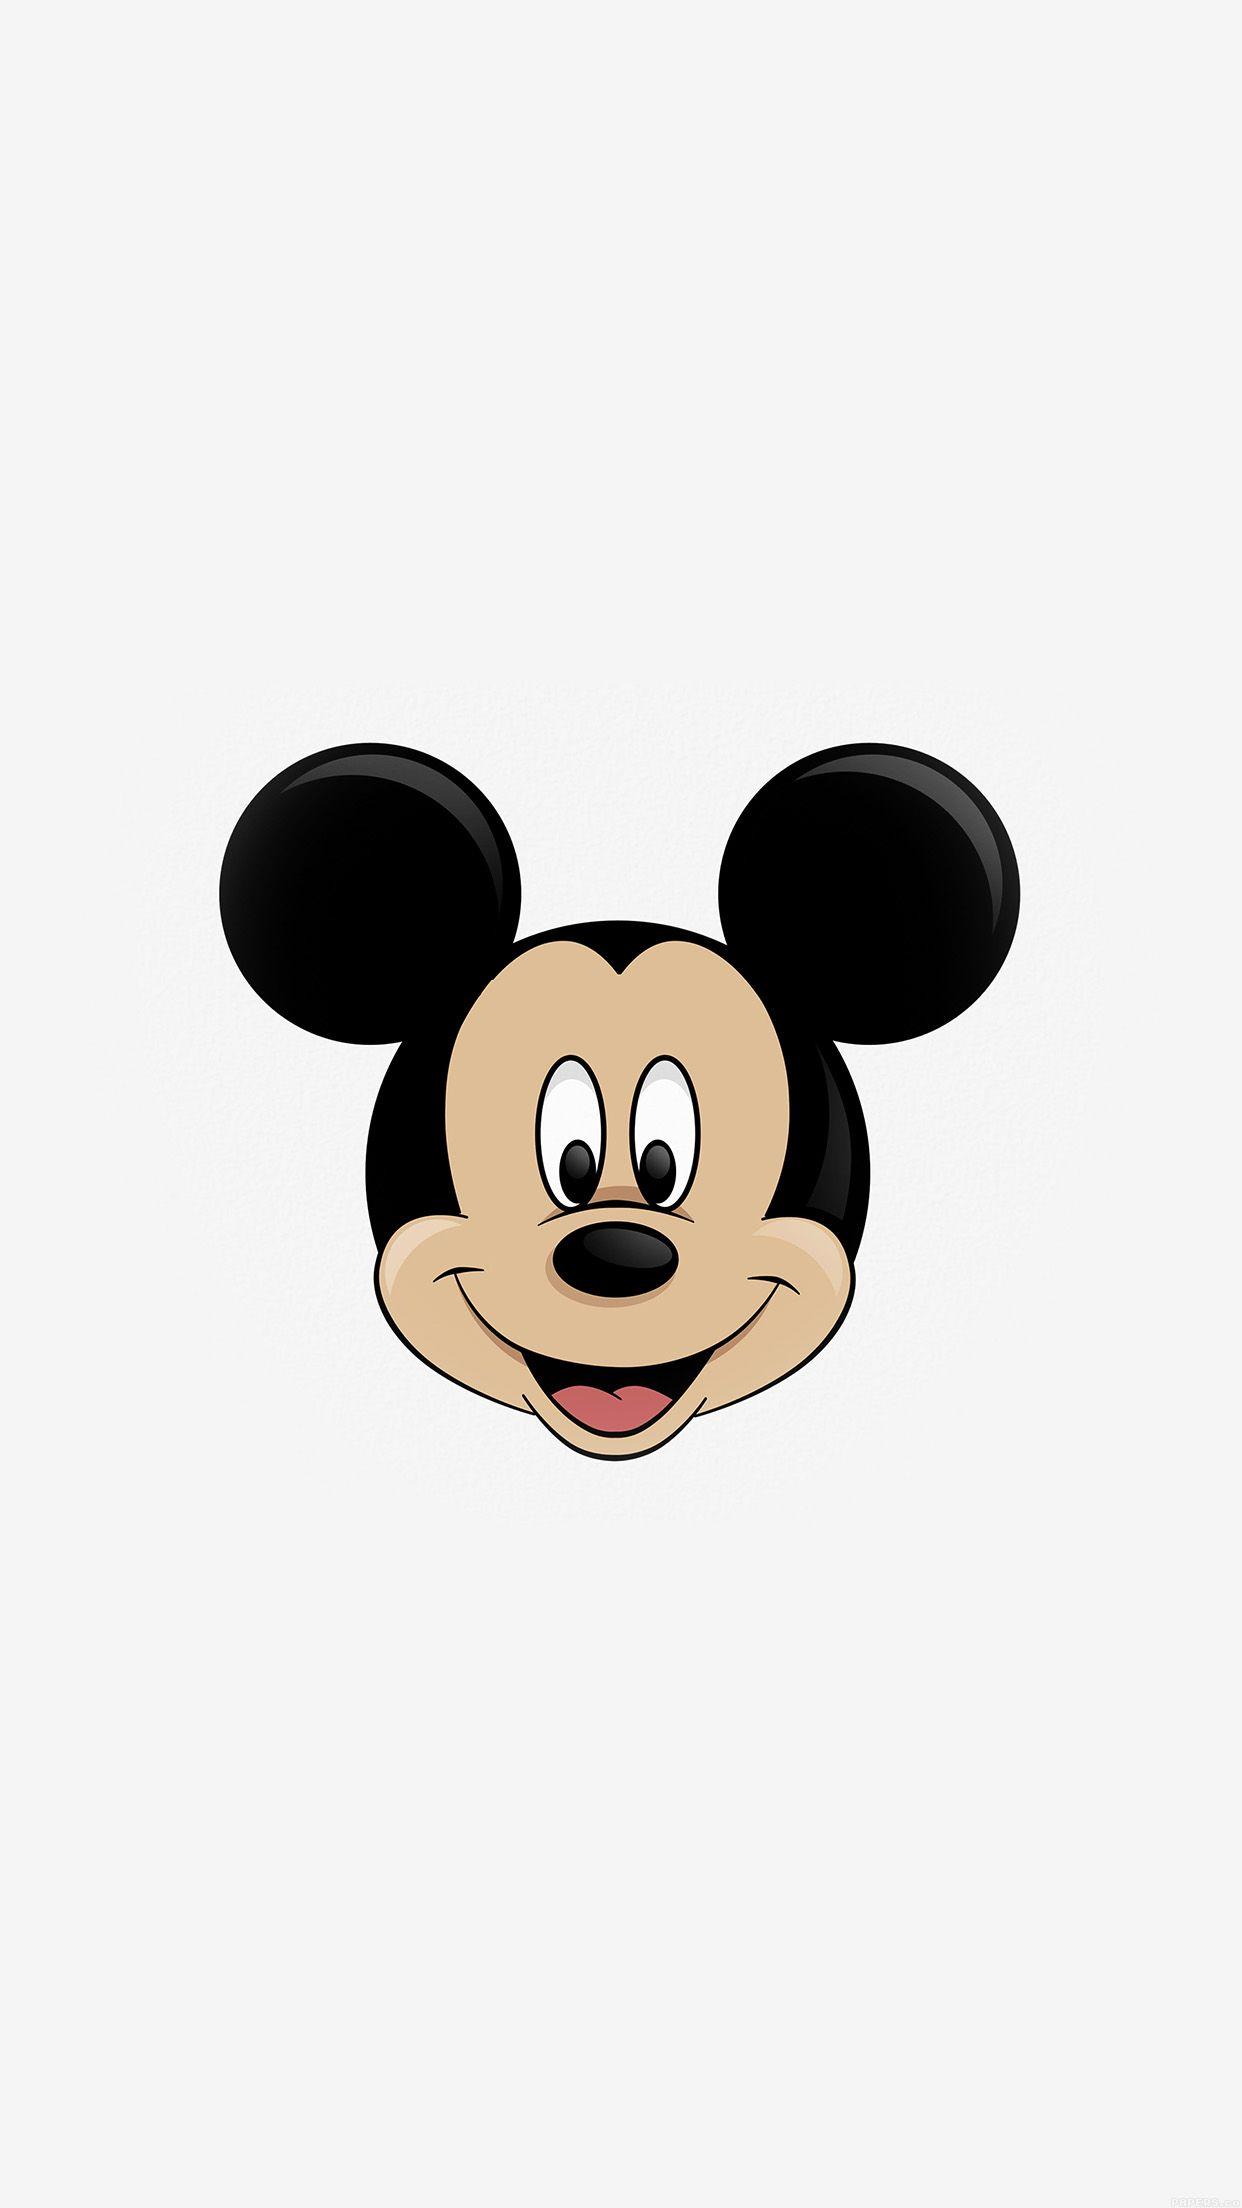 Micky Mouse Logo - iPhone7papers - ag30-mickey-mouse-logo-disney